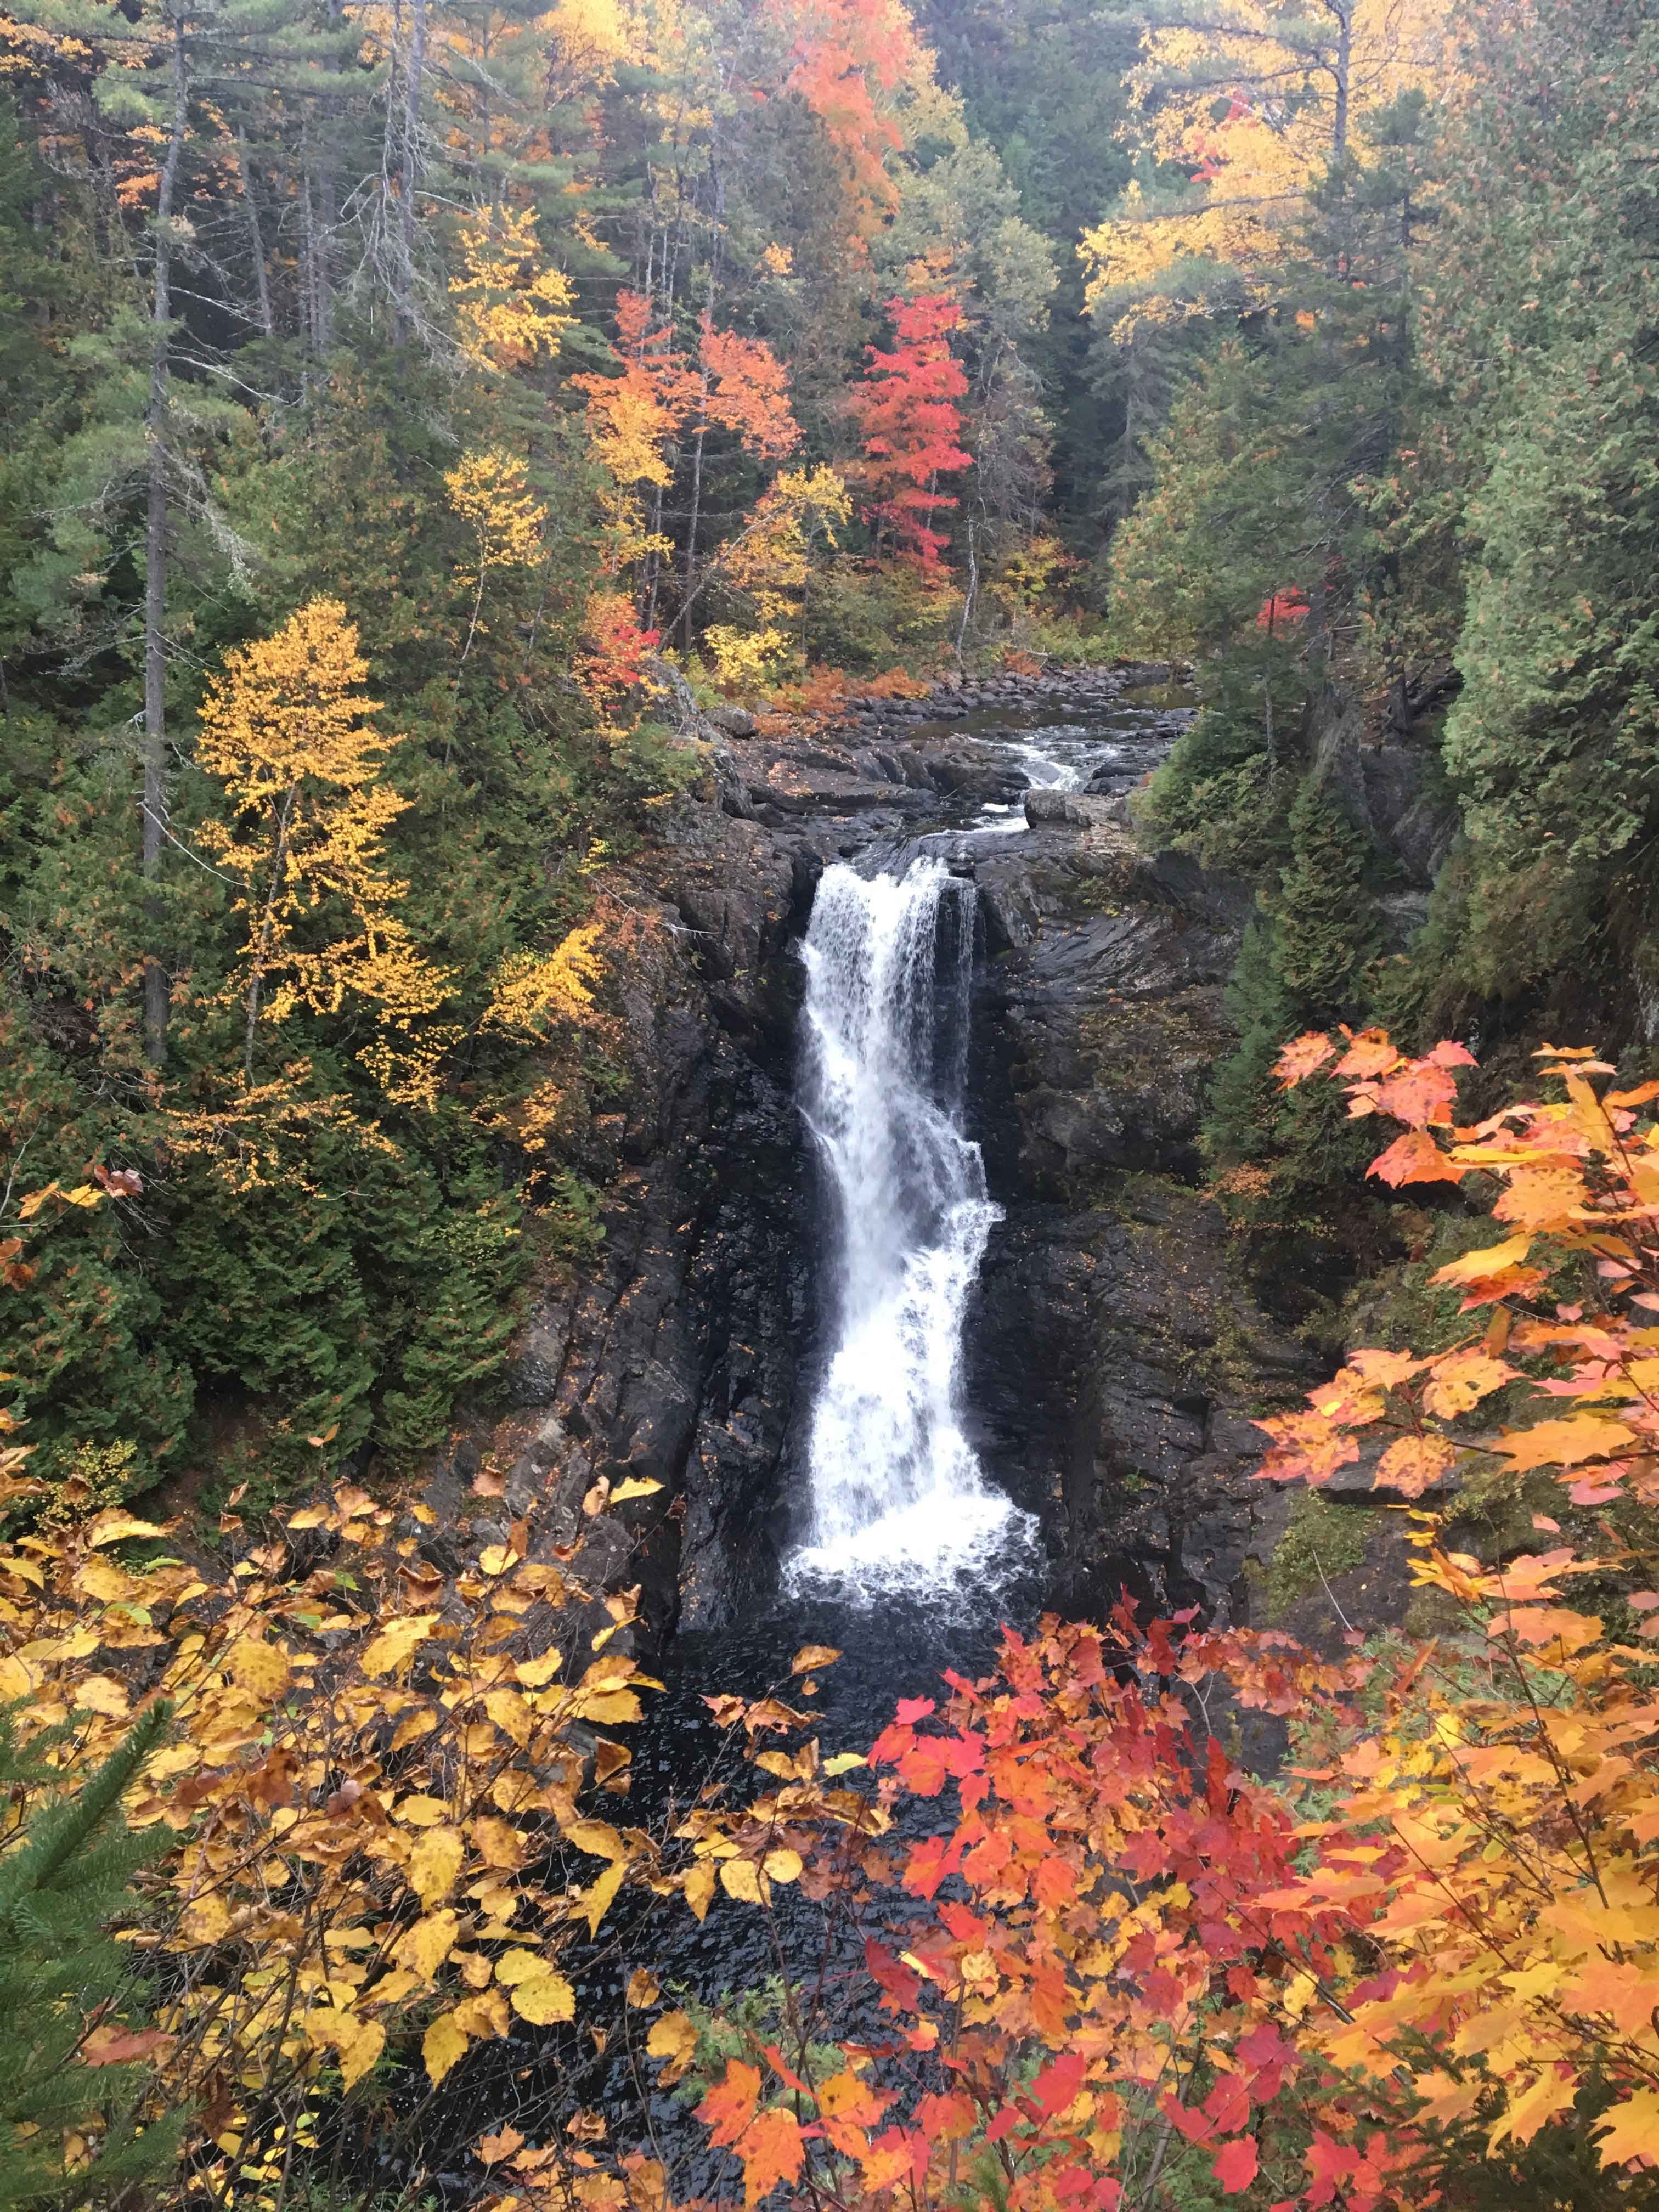 Moxie Falls - West Forks, ME.